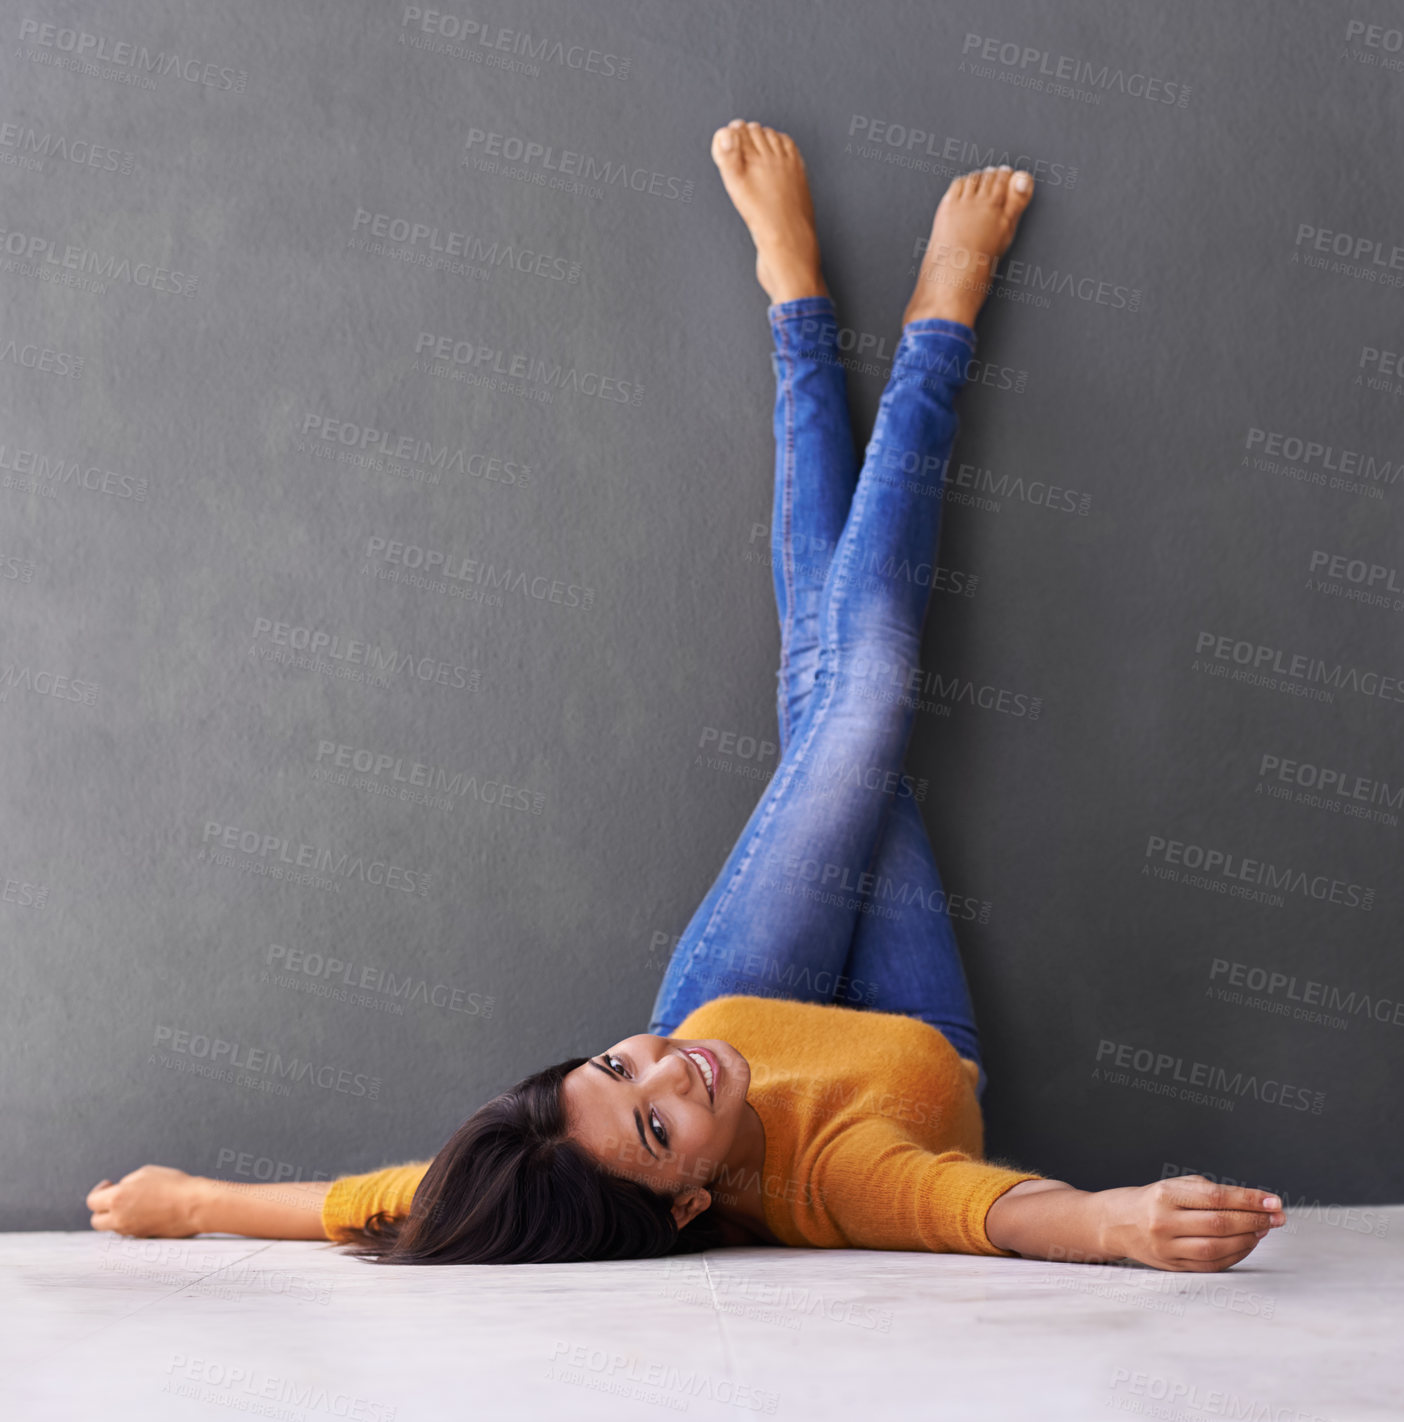 Buy stock photo Portrait, woman and smile to relax on floor with a dark wall background in casual style. Leisure, rest and face of female person with rest and fashion upside down with her feet on a studio backdrop